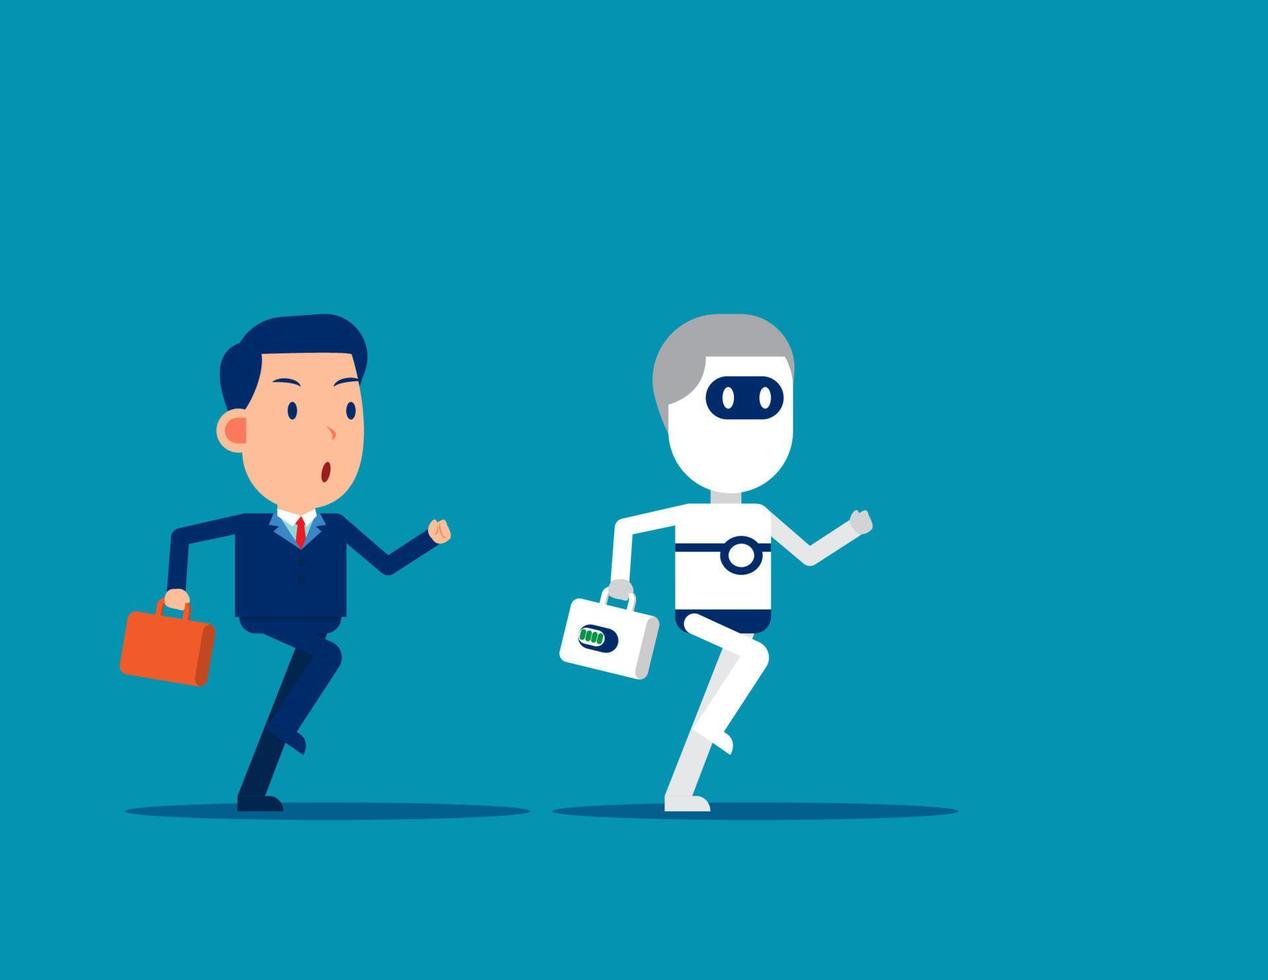 Human vs Robot. Business competing with artificial intelligence vector